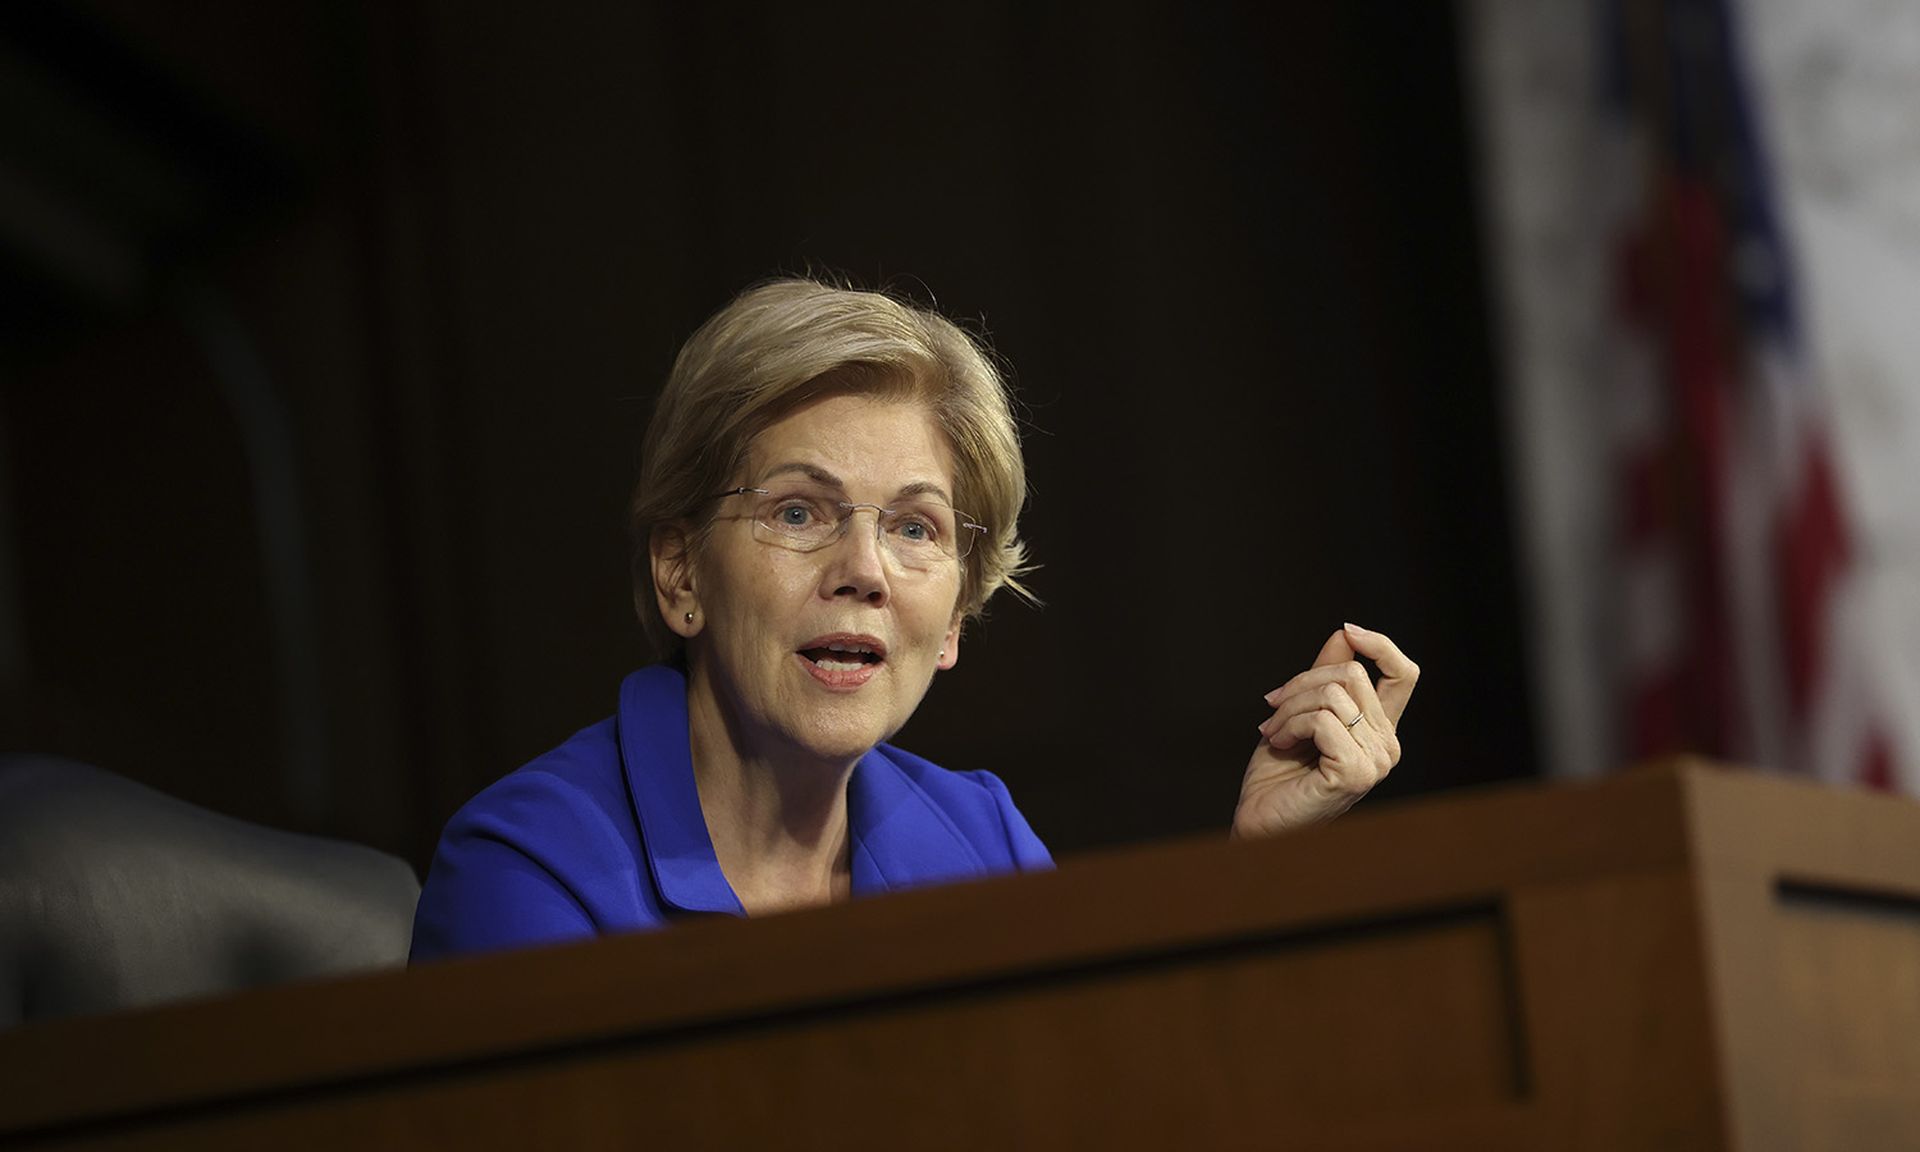 Sen. Elizabeth Warren, D-Mass., questions Treasury Secretary Janet Yellen and Federal Reserve Chairman Powell during a Senate Banking, Housing and Urban Affairs Committee hearing at the Hart Senate Office Building on Sept. 28, 2021, in Washington. (Photo by Kevin Dietsch/Getty Images)